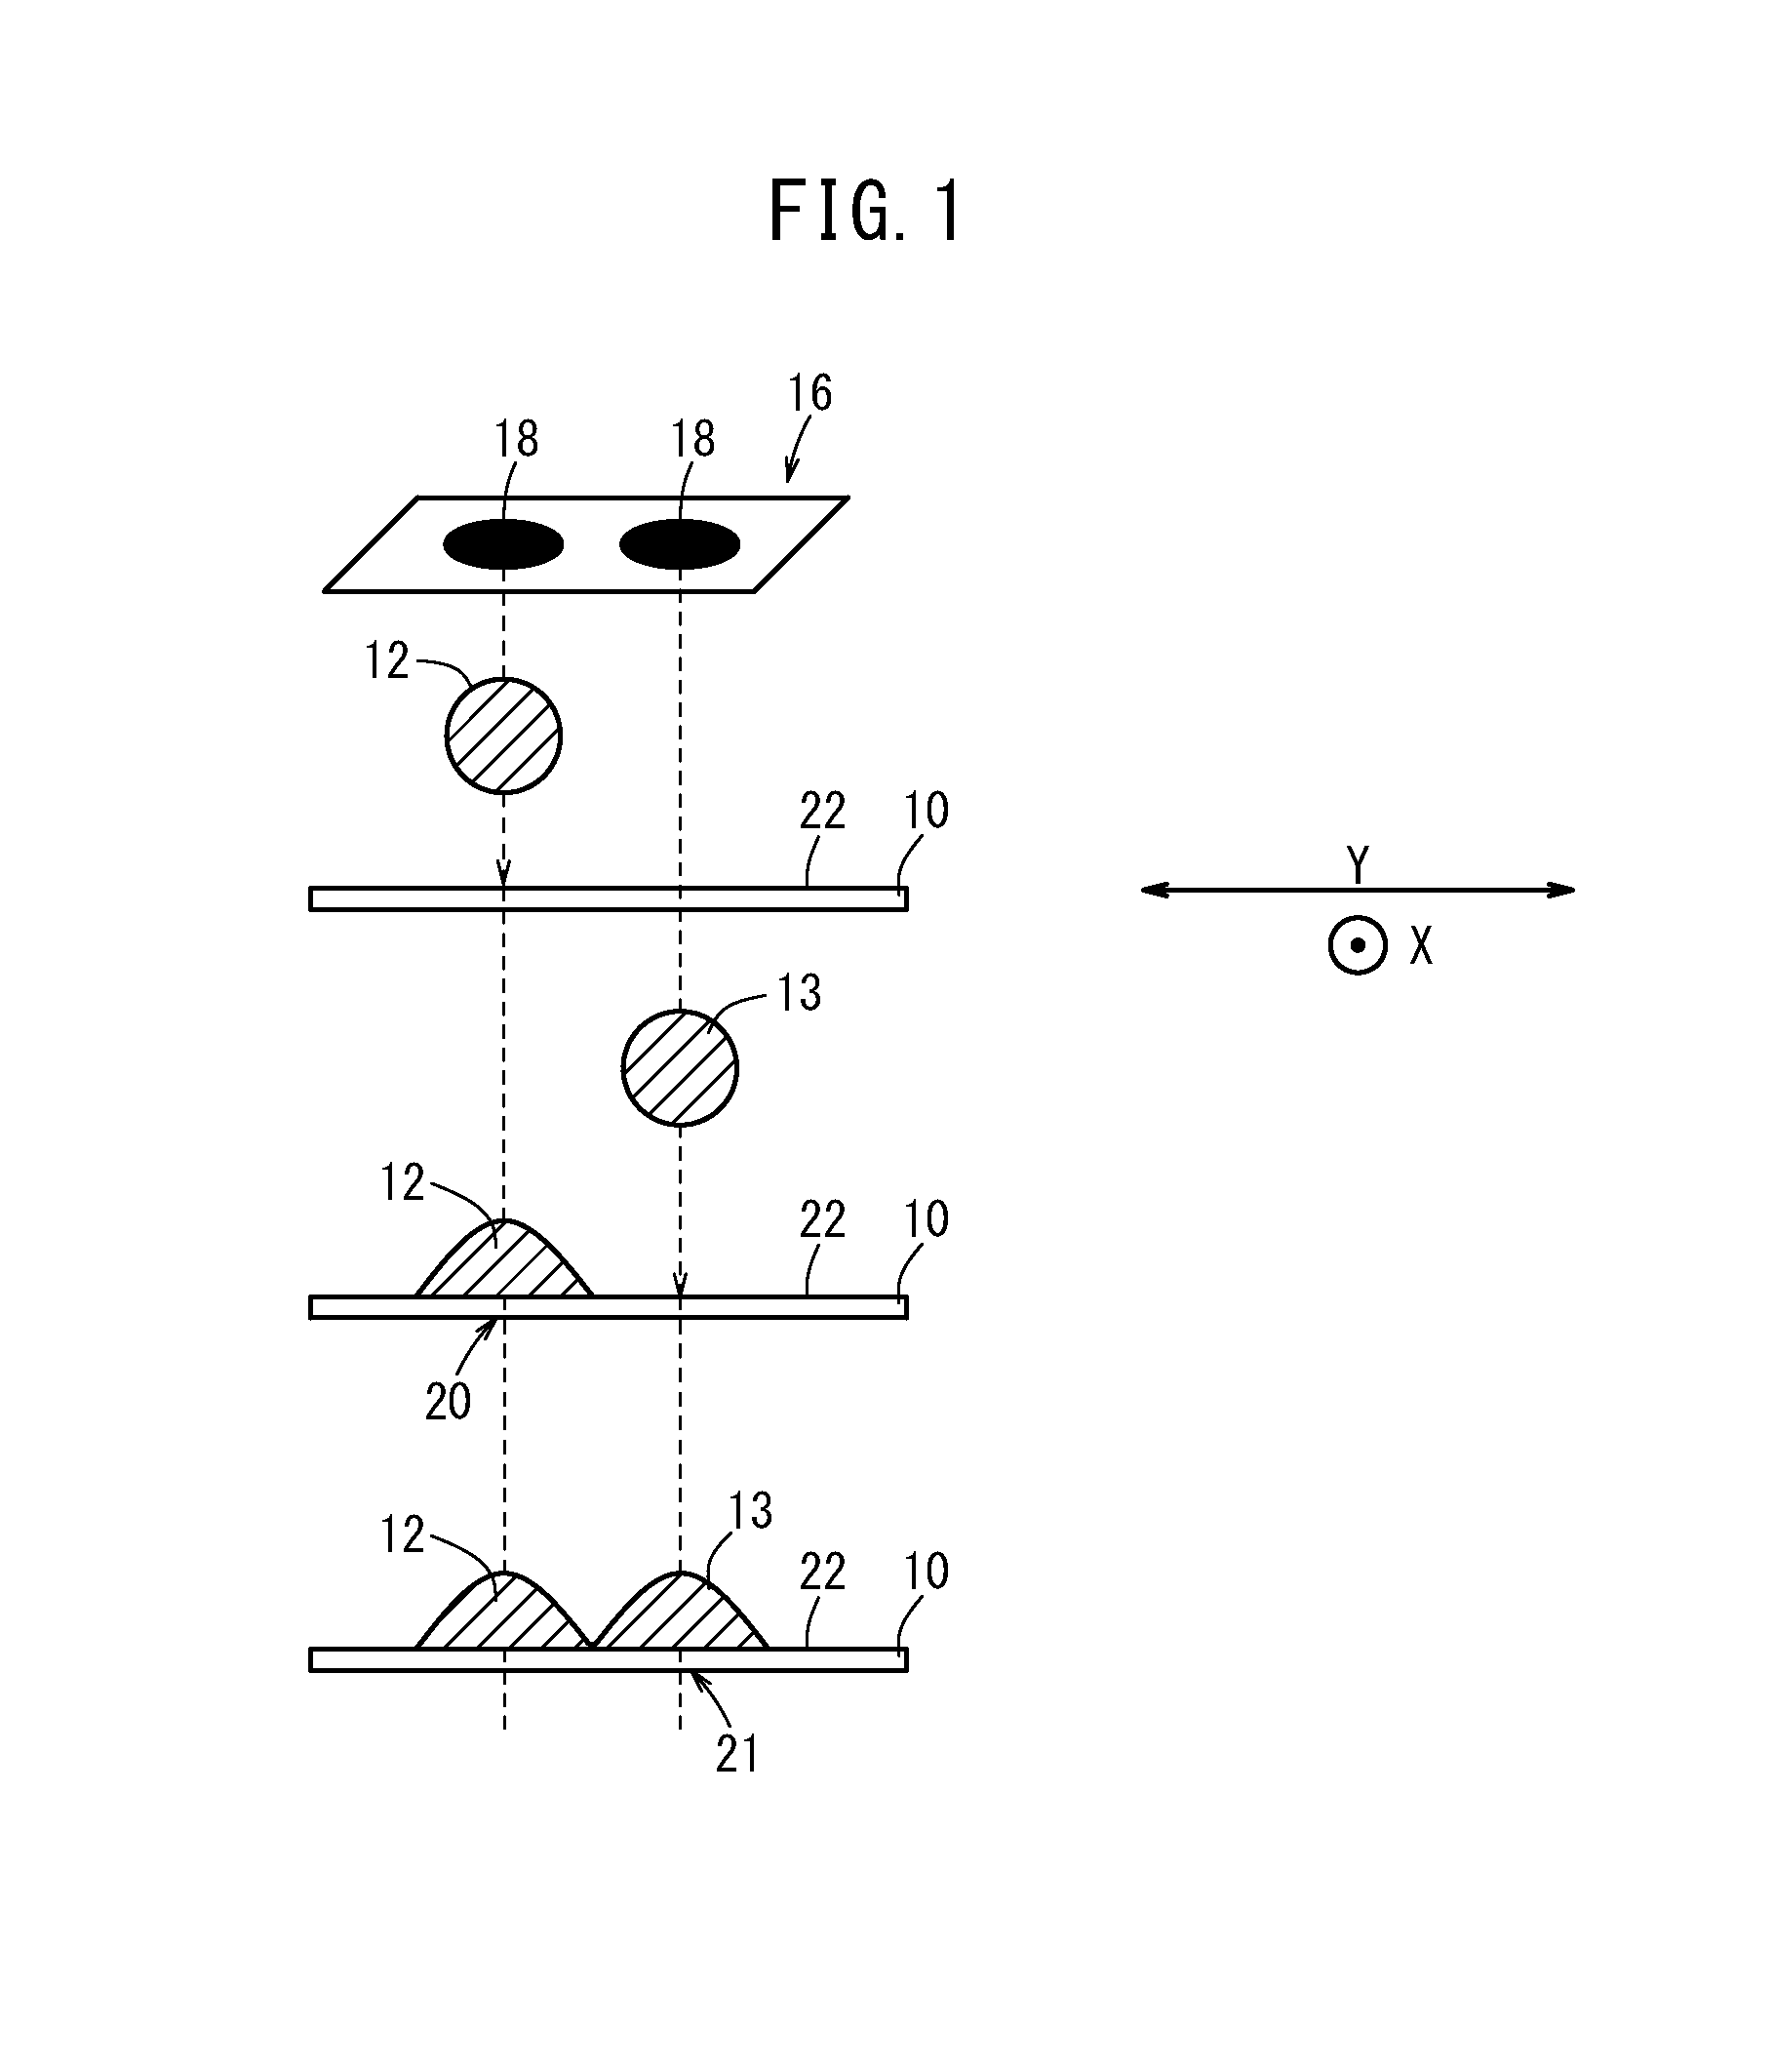 Image producing apparatus and image producing method